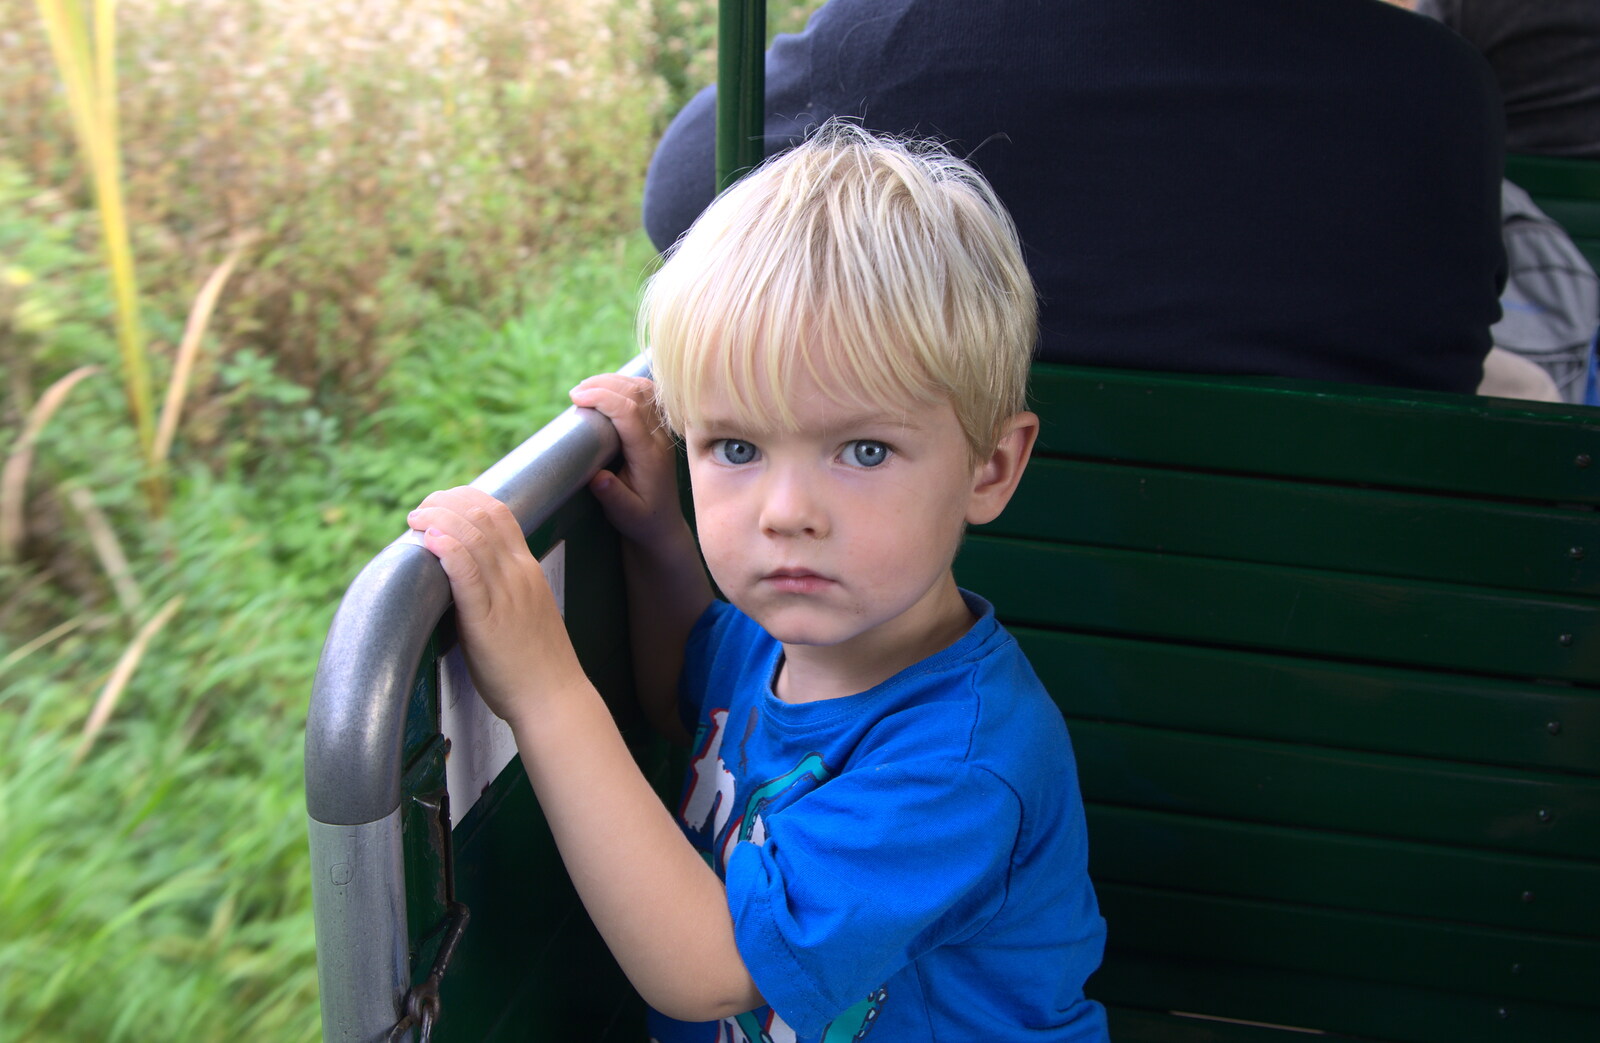 Gabes gives one of his stares from A Trip to Bressingham Steam Museum, Bressingham, Norfolk - 28th September 2014